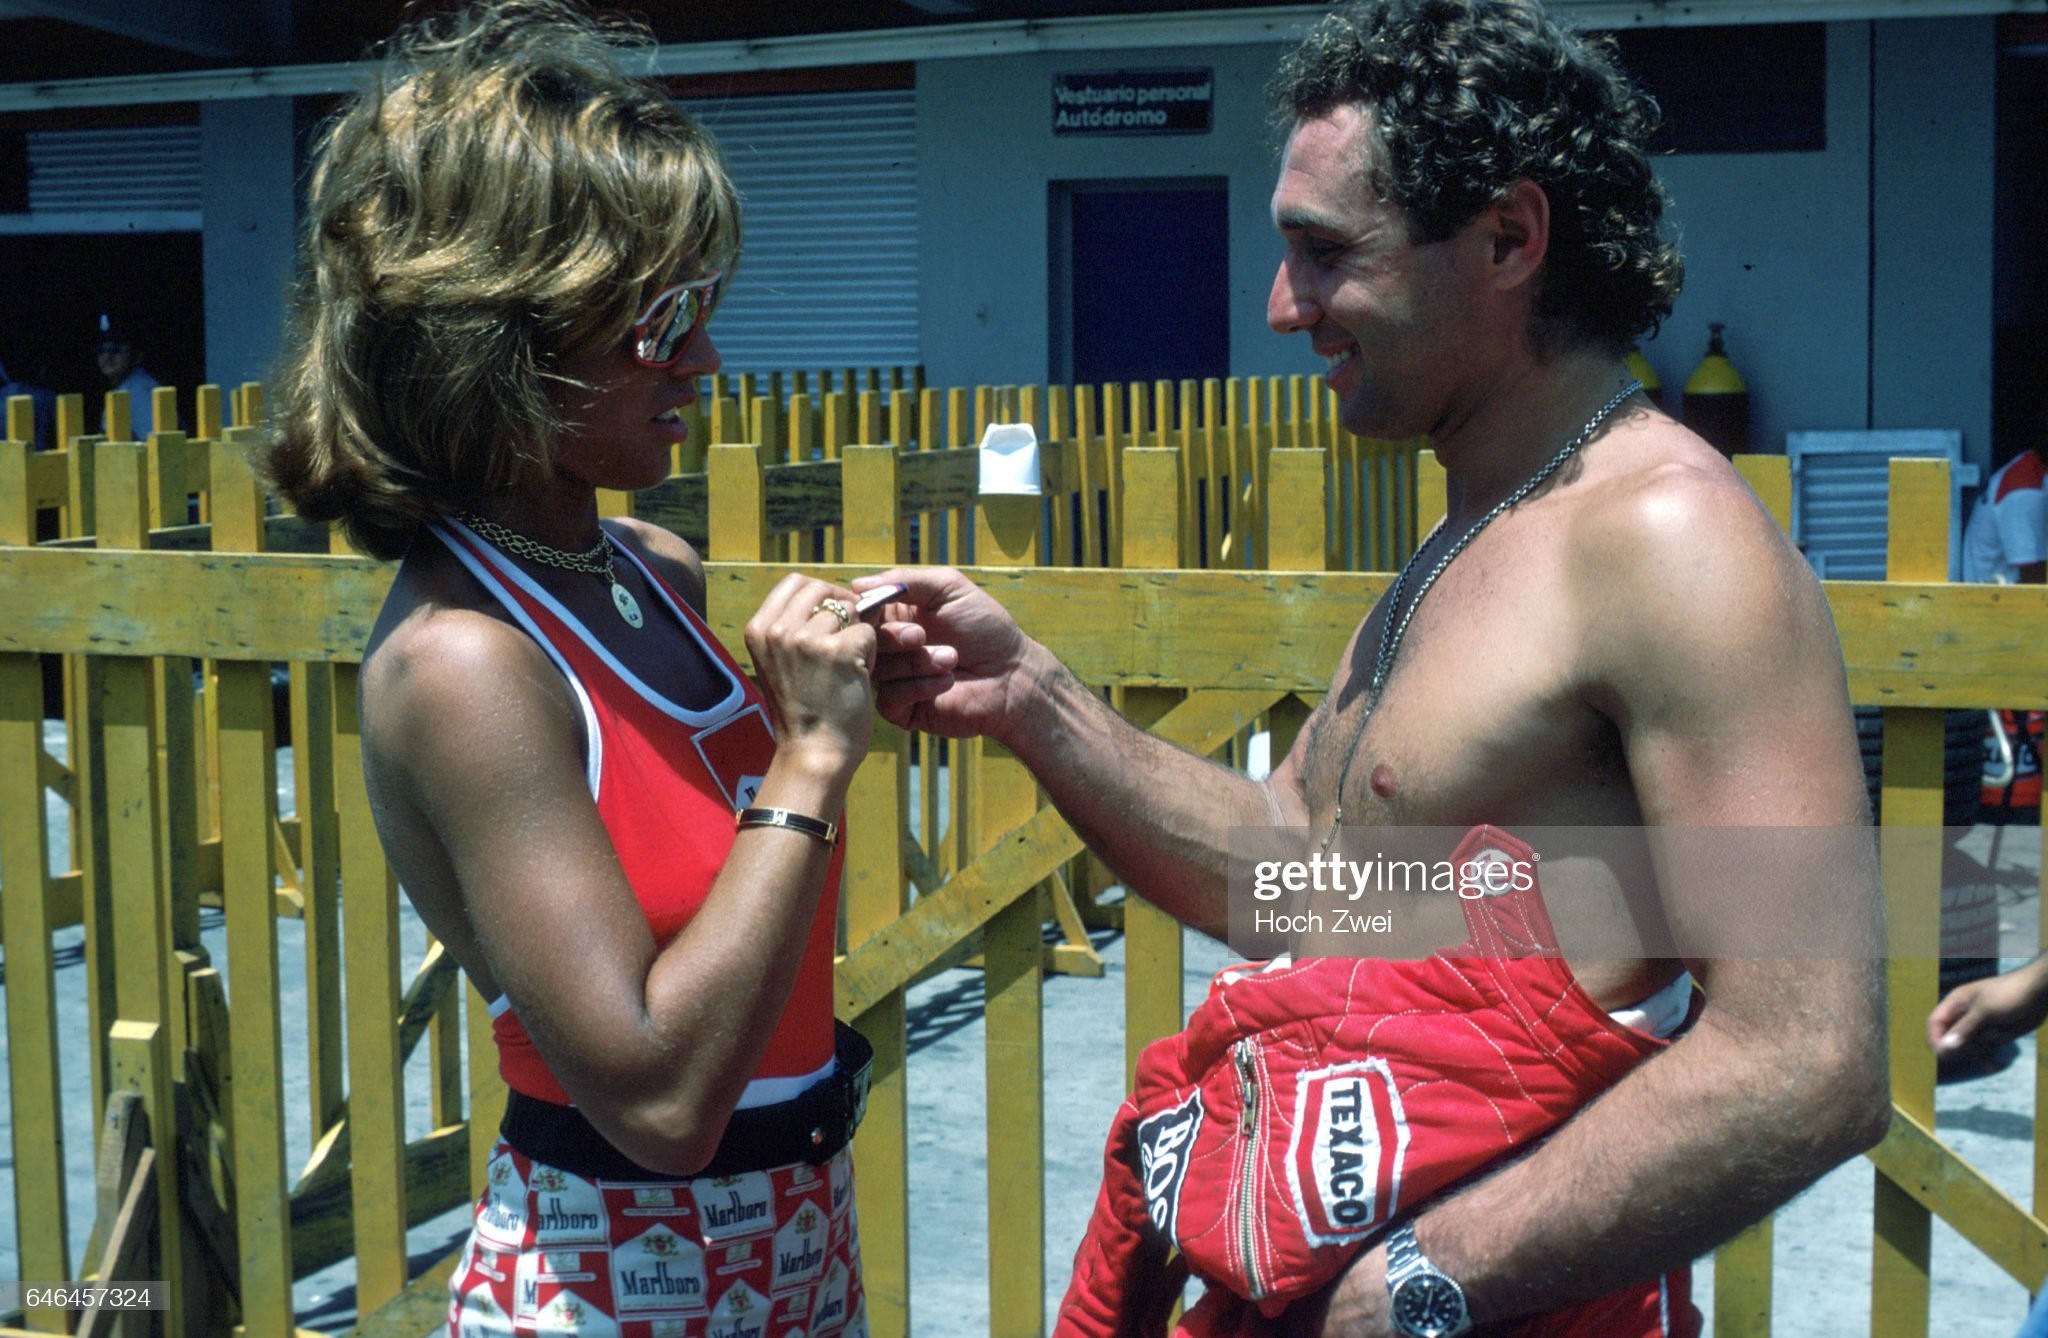 Jochen Mass with a Marlboro girl at the Argentinean Grand Prix on January 09, 1977. 